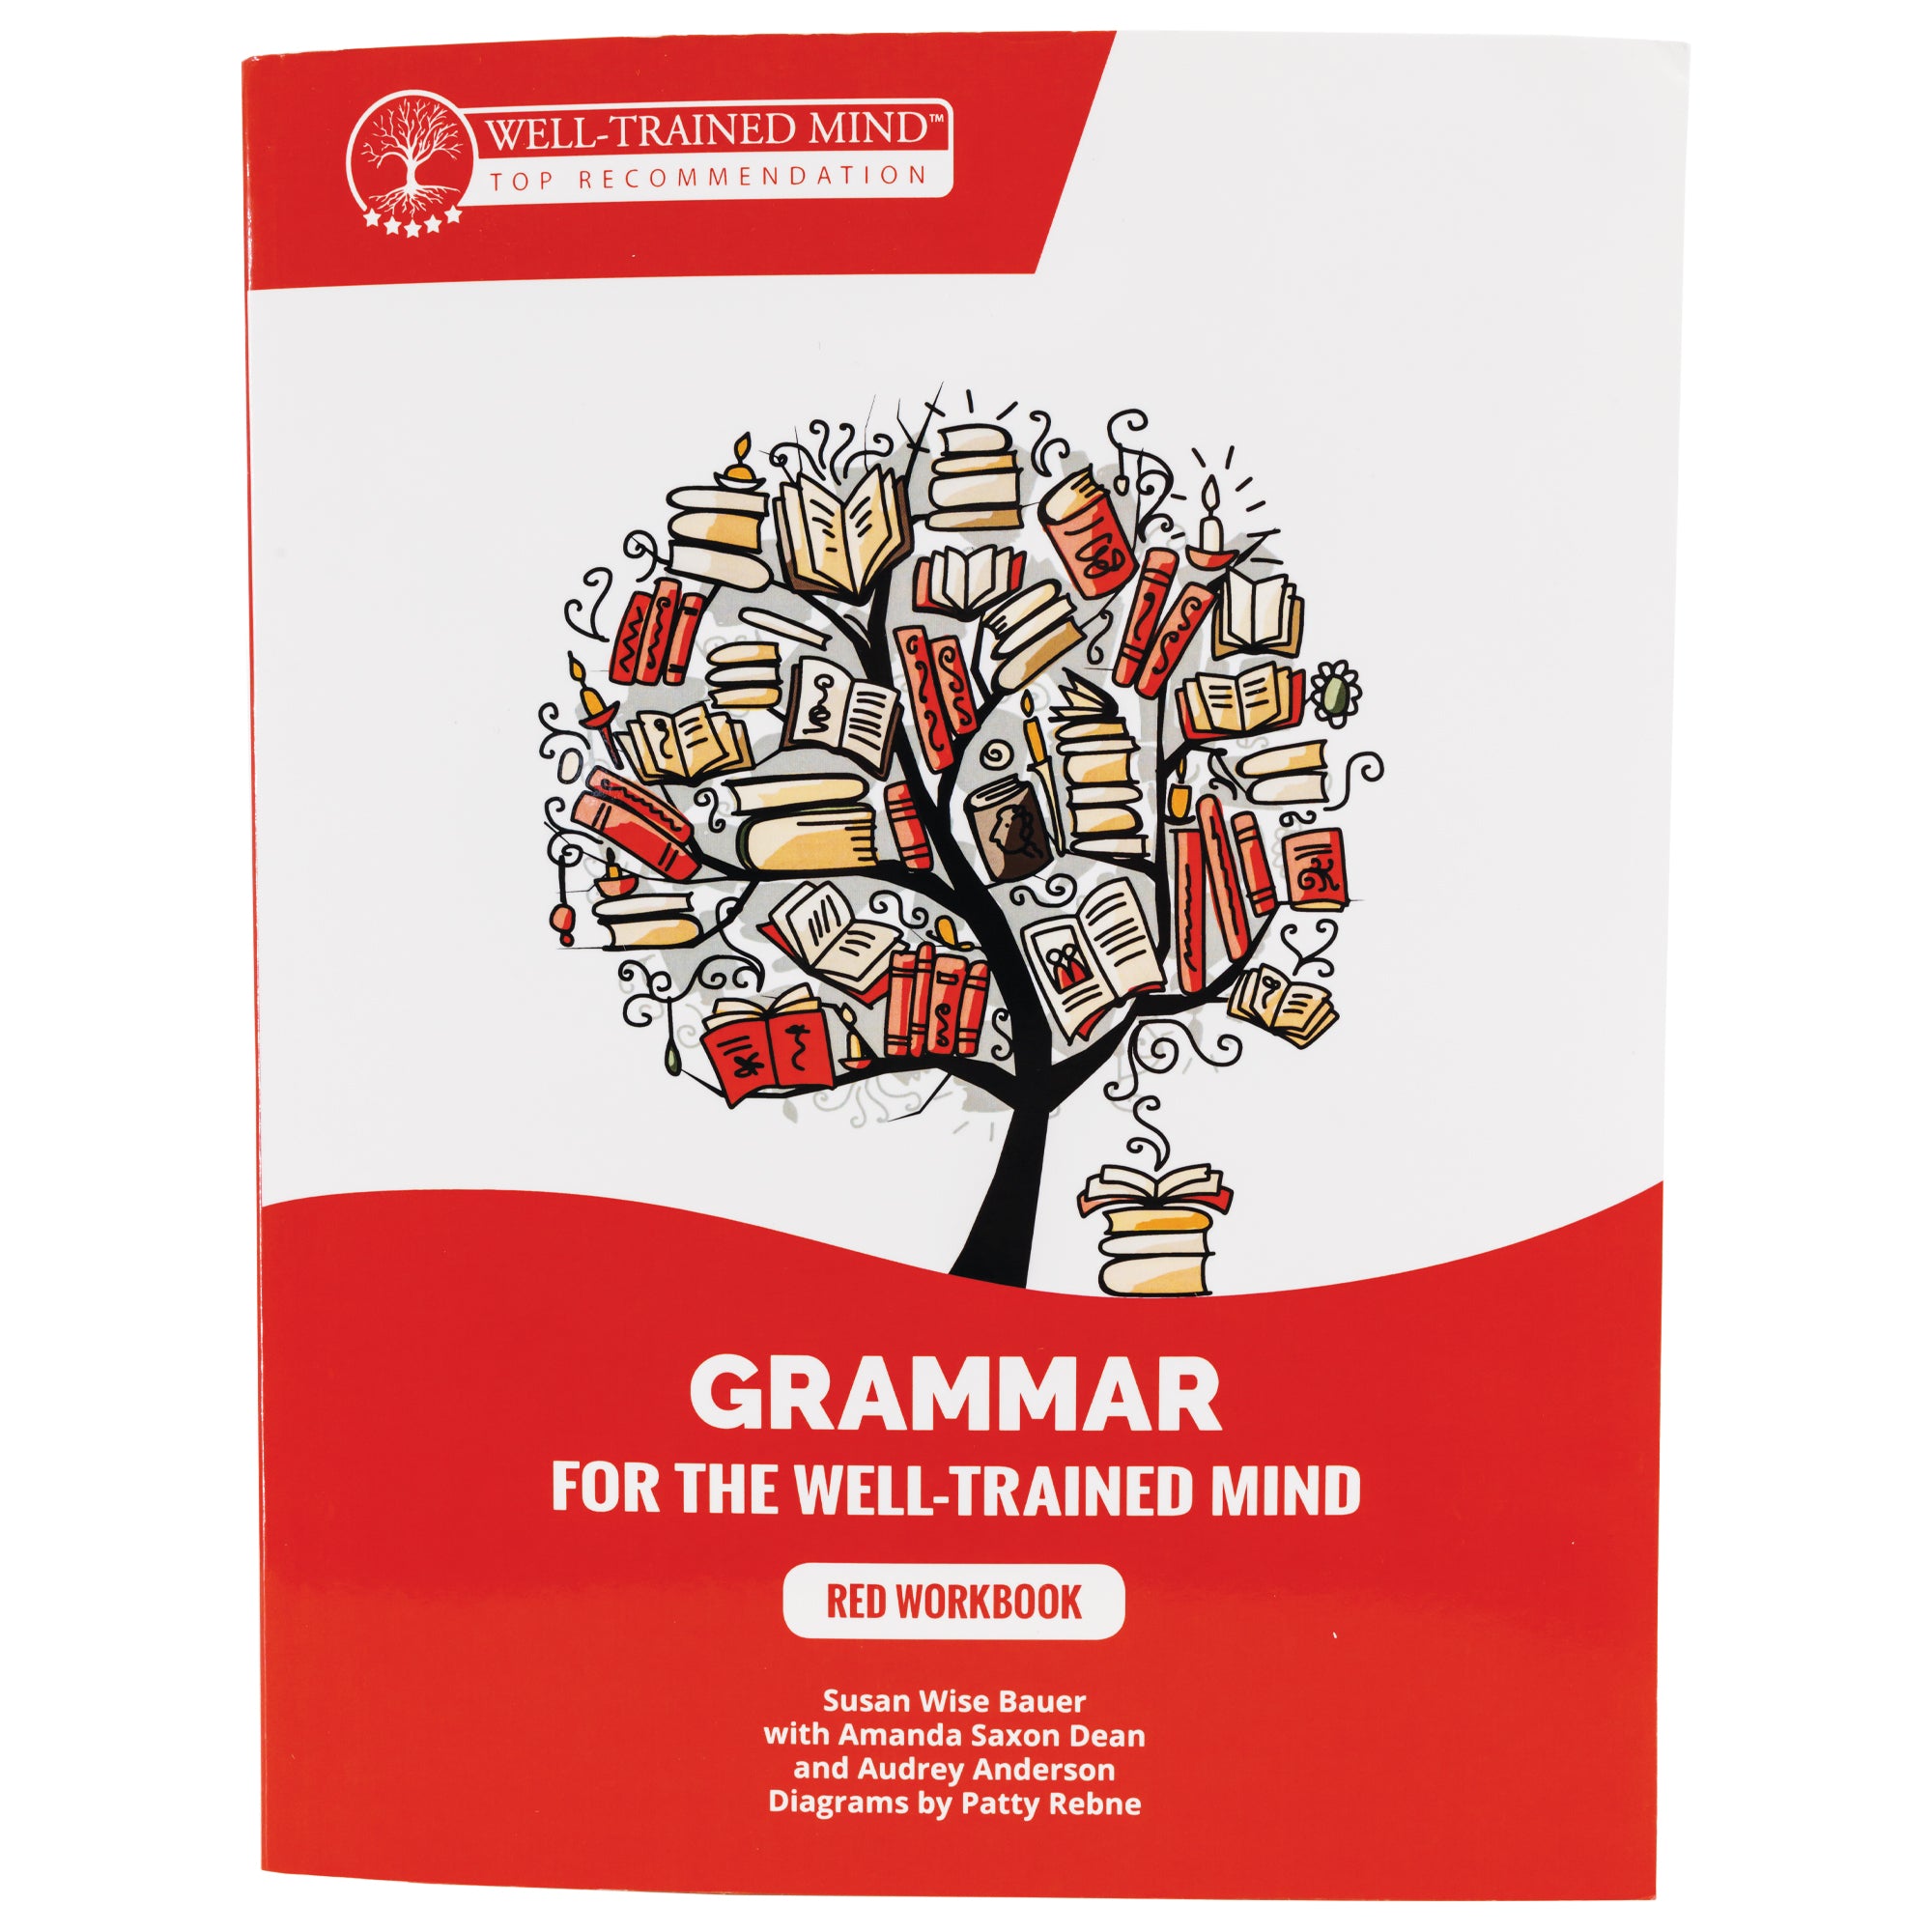 Grammar for the Well-Trained Mind red book cover. The cover has a white top and a red bottom with a wave shape between the 2 colors. There is an illustration in the white section of a tree with books for leaves and a stack of books near the trunk. In the red section at the bottom is white text, including the title and “Red Workbook.”